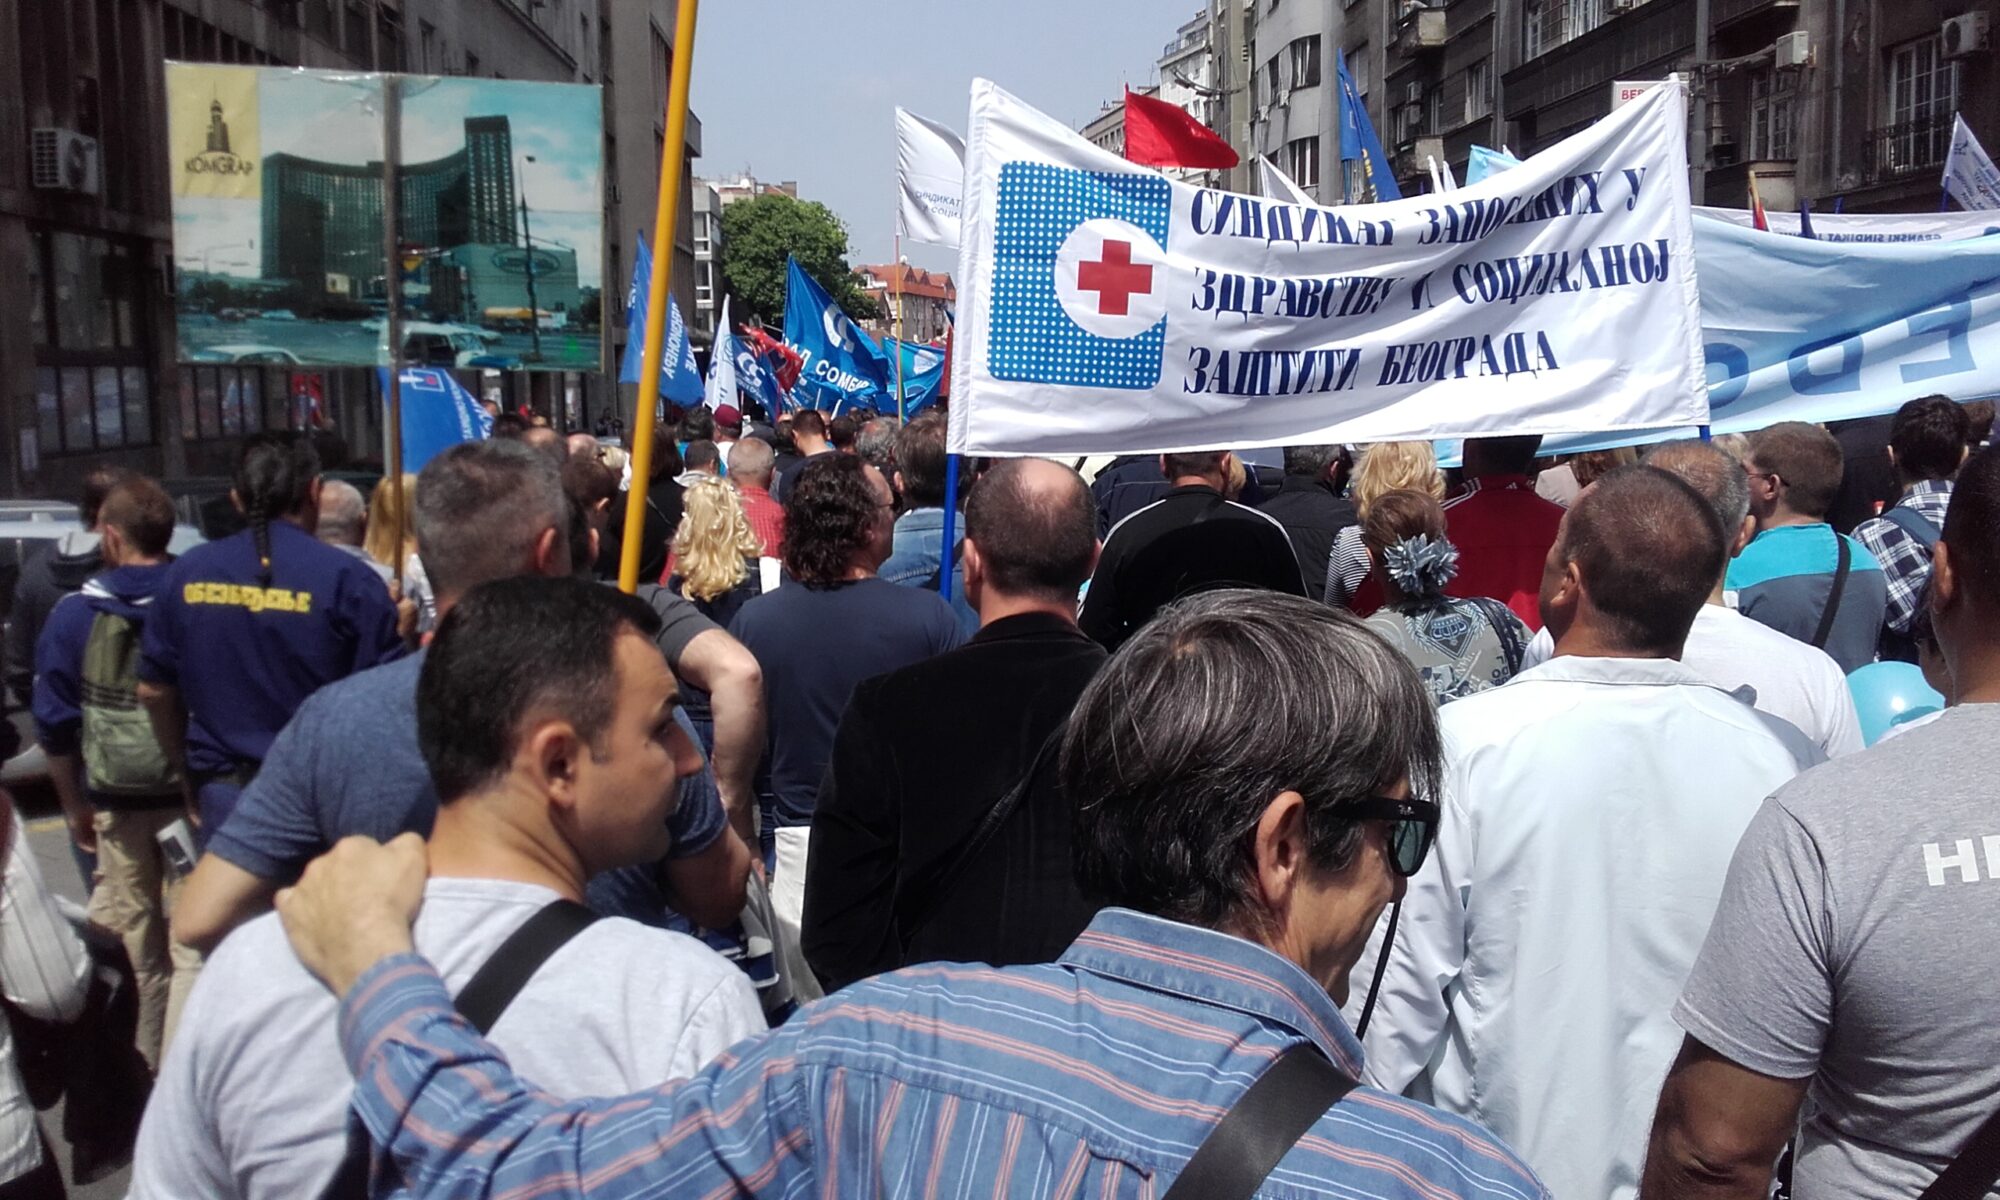 Serbia's unions celebrate May Day. Credit: Solidarity Center